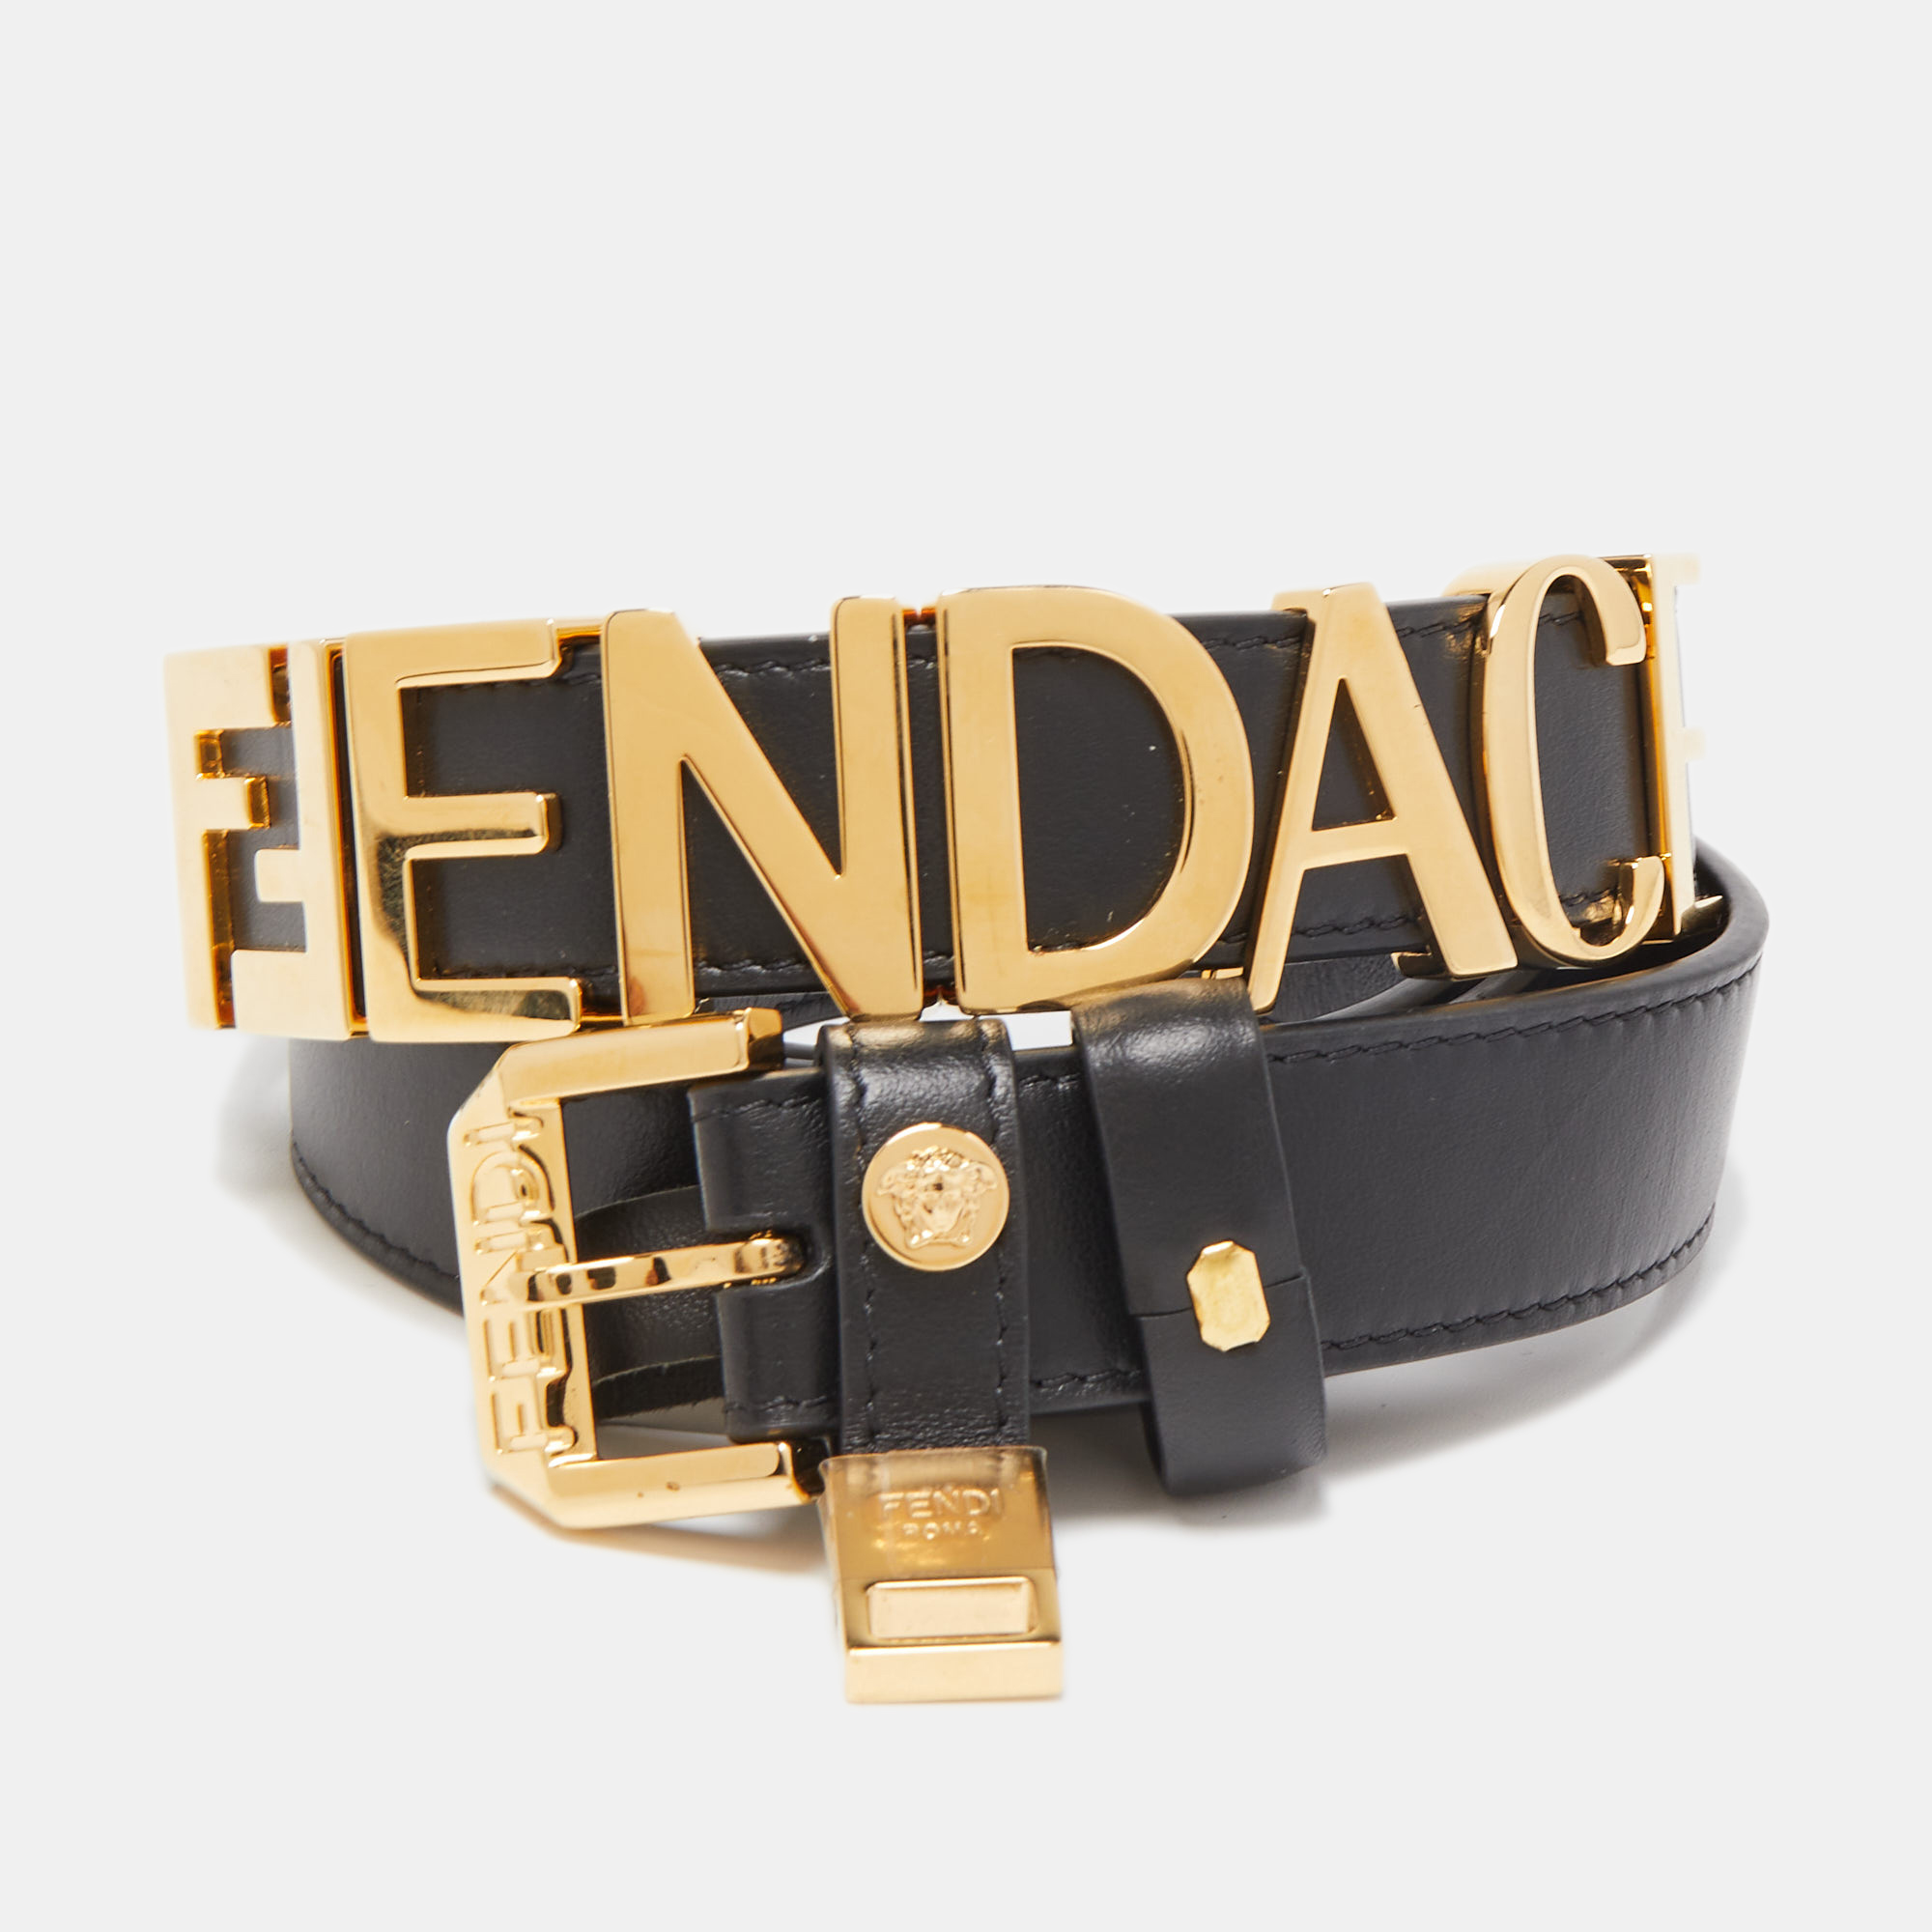 The Fendi x Versace belt is a luxurious fashion accessory that combines the iconic styles of both brands. Made from premium black leather it features a prominent buckle adorned with FENDACE logo creating a bold and stylish statement piece.